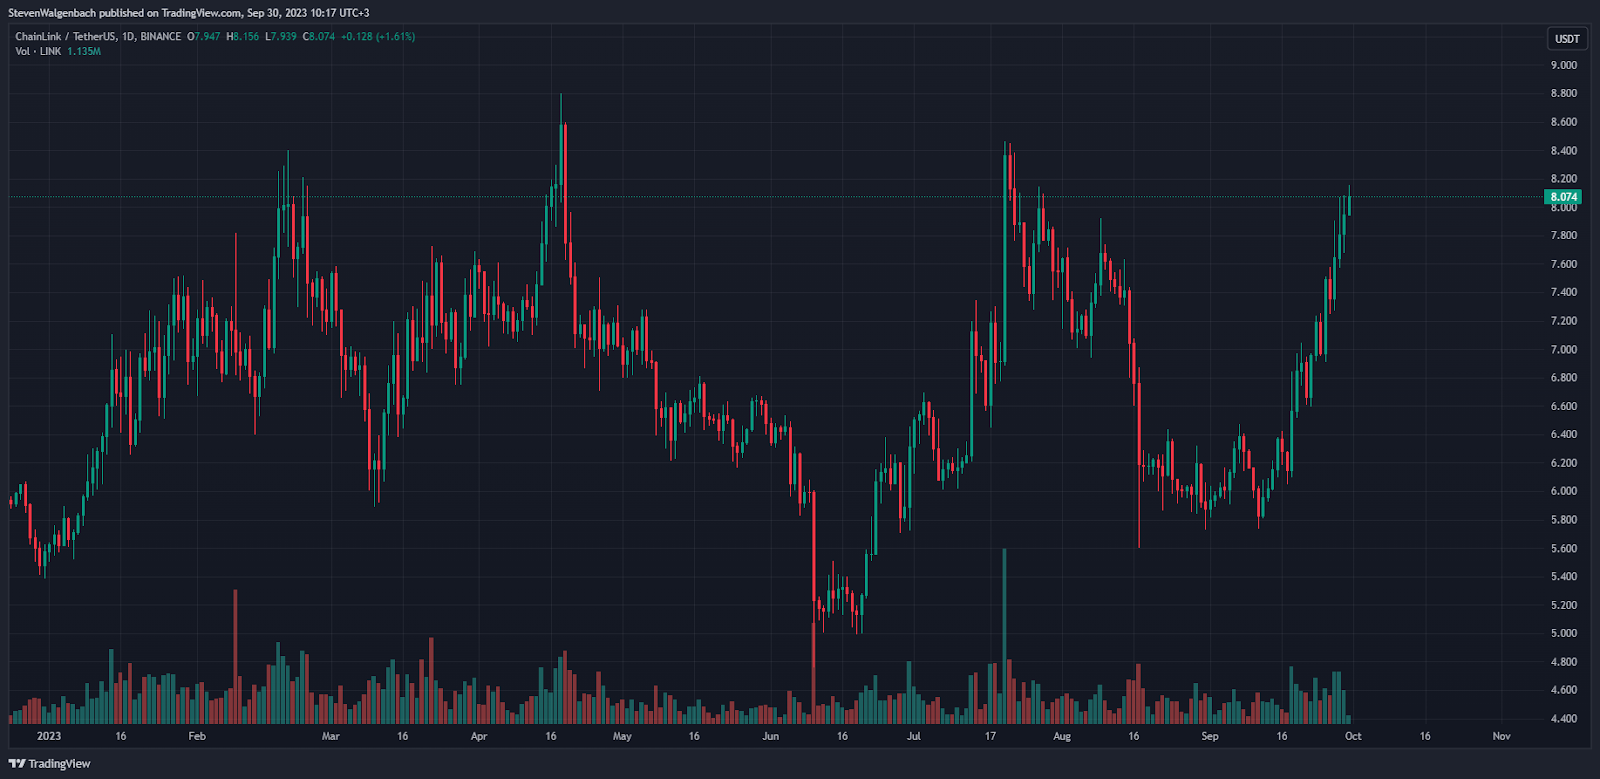 Daily chart for LINK/USDT (Source: TradingView)